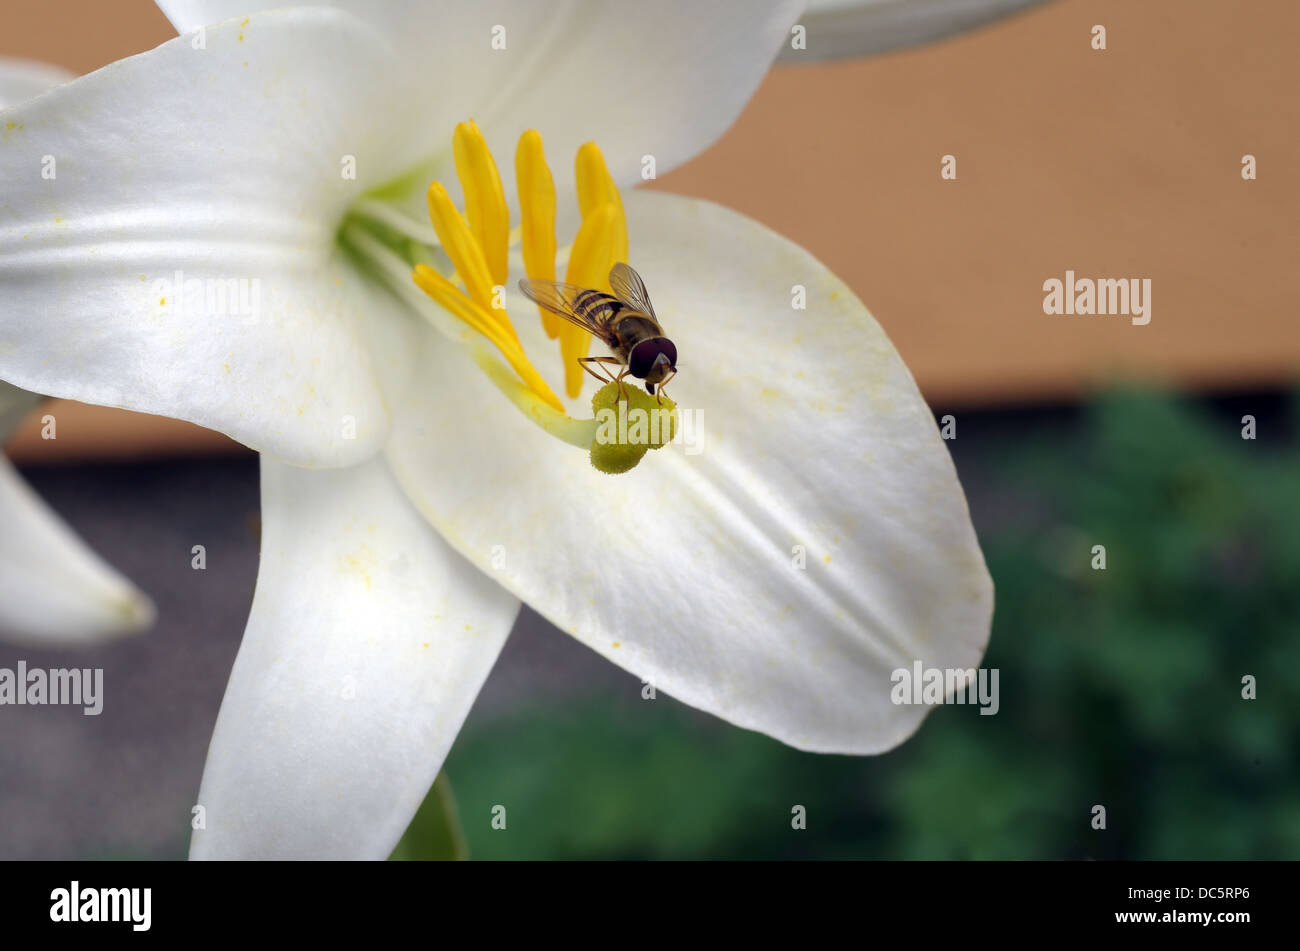 like a wasp fly (Syrphidae) sucking nectar from Lilies Stock Photo